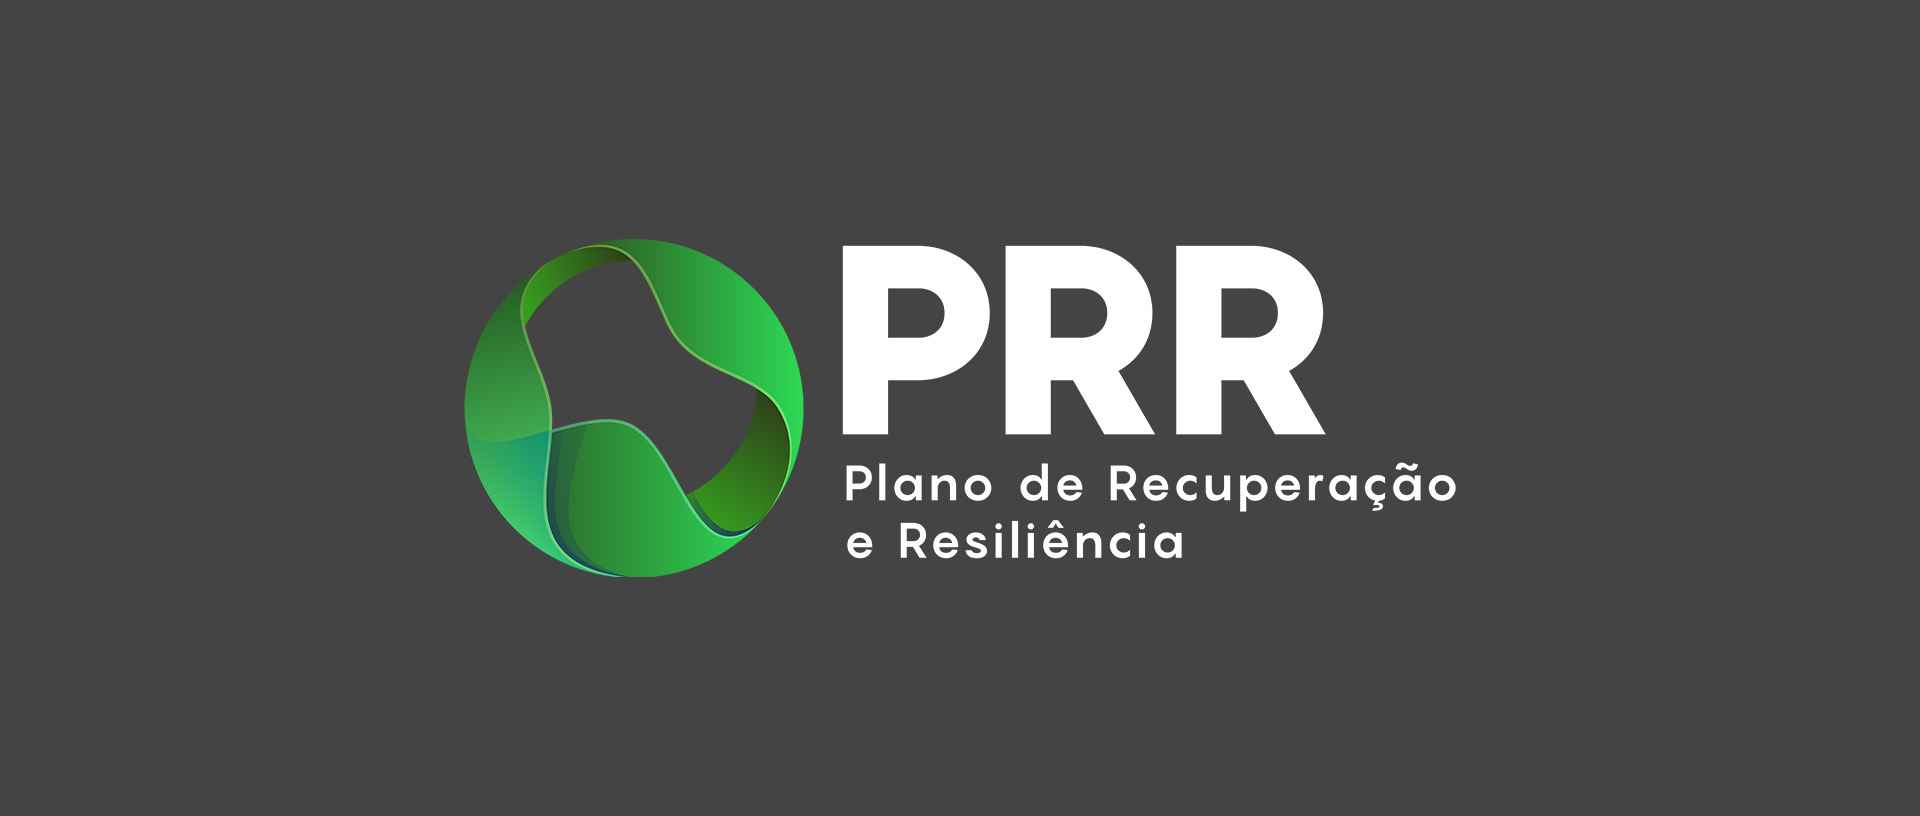 PRR - Recovery and Resilience Plan logo